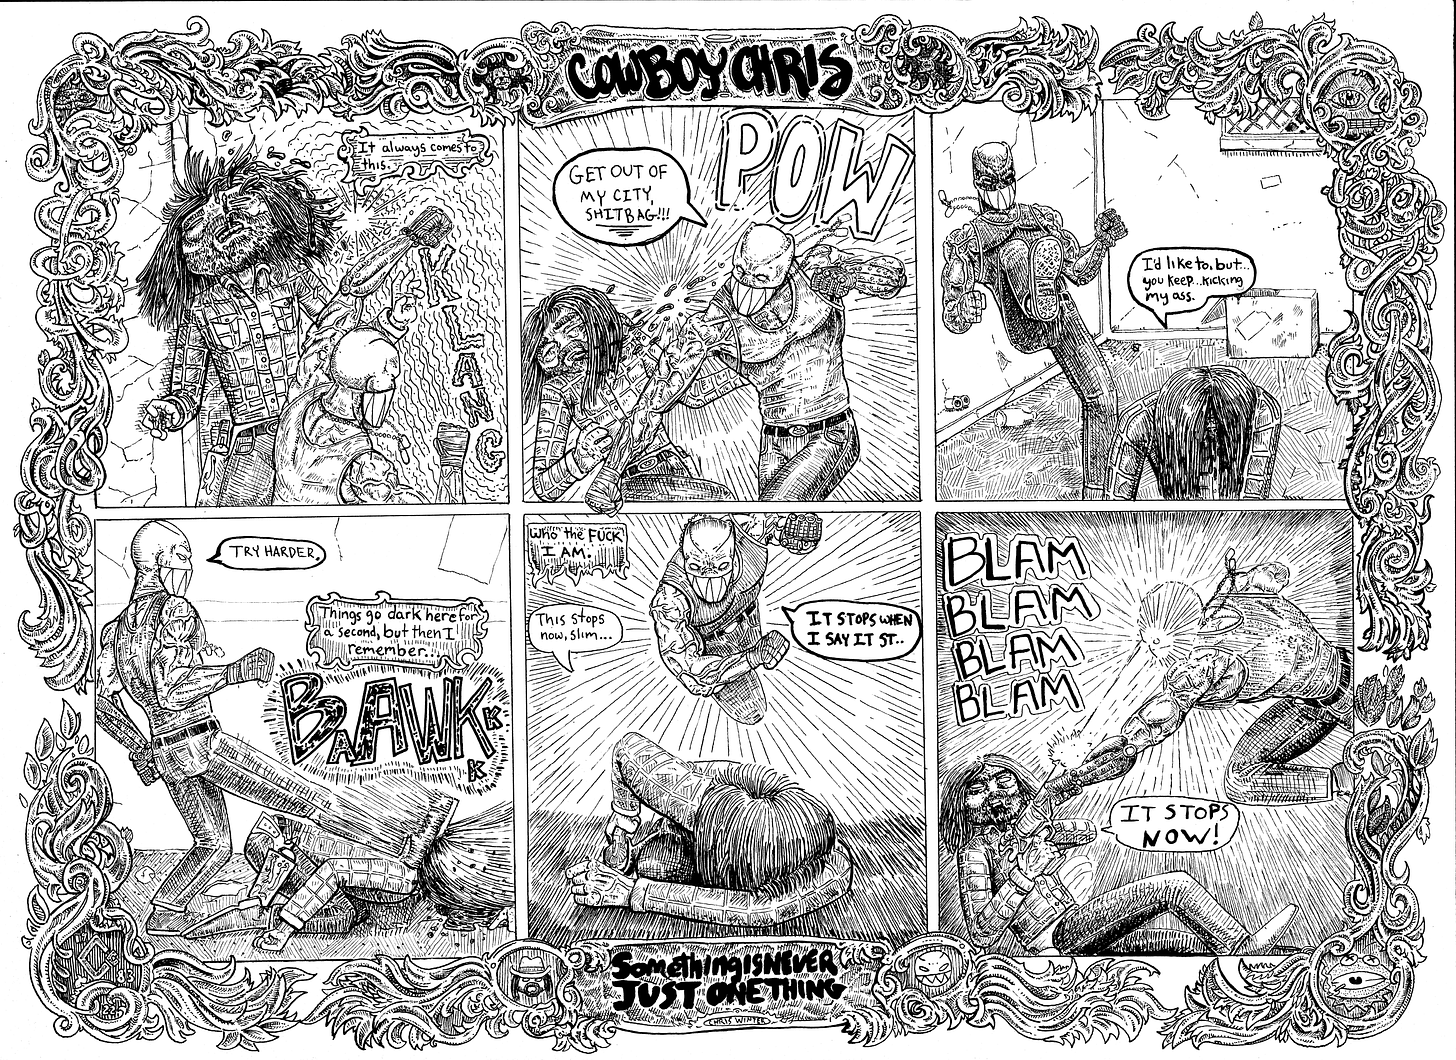 A six panel comic titled “something is never just one thing”. In the first panel, Cowboy Chris is getting punched with a Klang. Narration reads “It always comes to this.” In the second, another punch from the mysterious assailant, who says “Get out of my city, shitbag” POW. Cowboy Chris, on his knees says “I’d like to, but…you keep kicking my ass.” The assailant kicks him while he’s down, saying “Try harder.” Baawk! Narration reads “Things go dark here for a second, but then I remember…” “Who the fuck I am.” Cowboy Chris says “This stops now, slim…” The attacker says “It stops when I say it st…” In the last panel, Cowboy Chris whips out his six shooter and Blam Blam Blam Blam right to the head of our martial arts maniac. “It stops now,” he says.